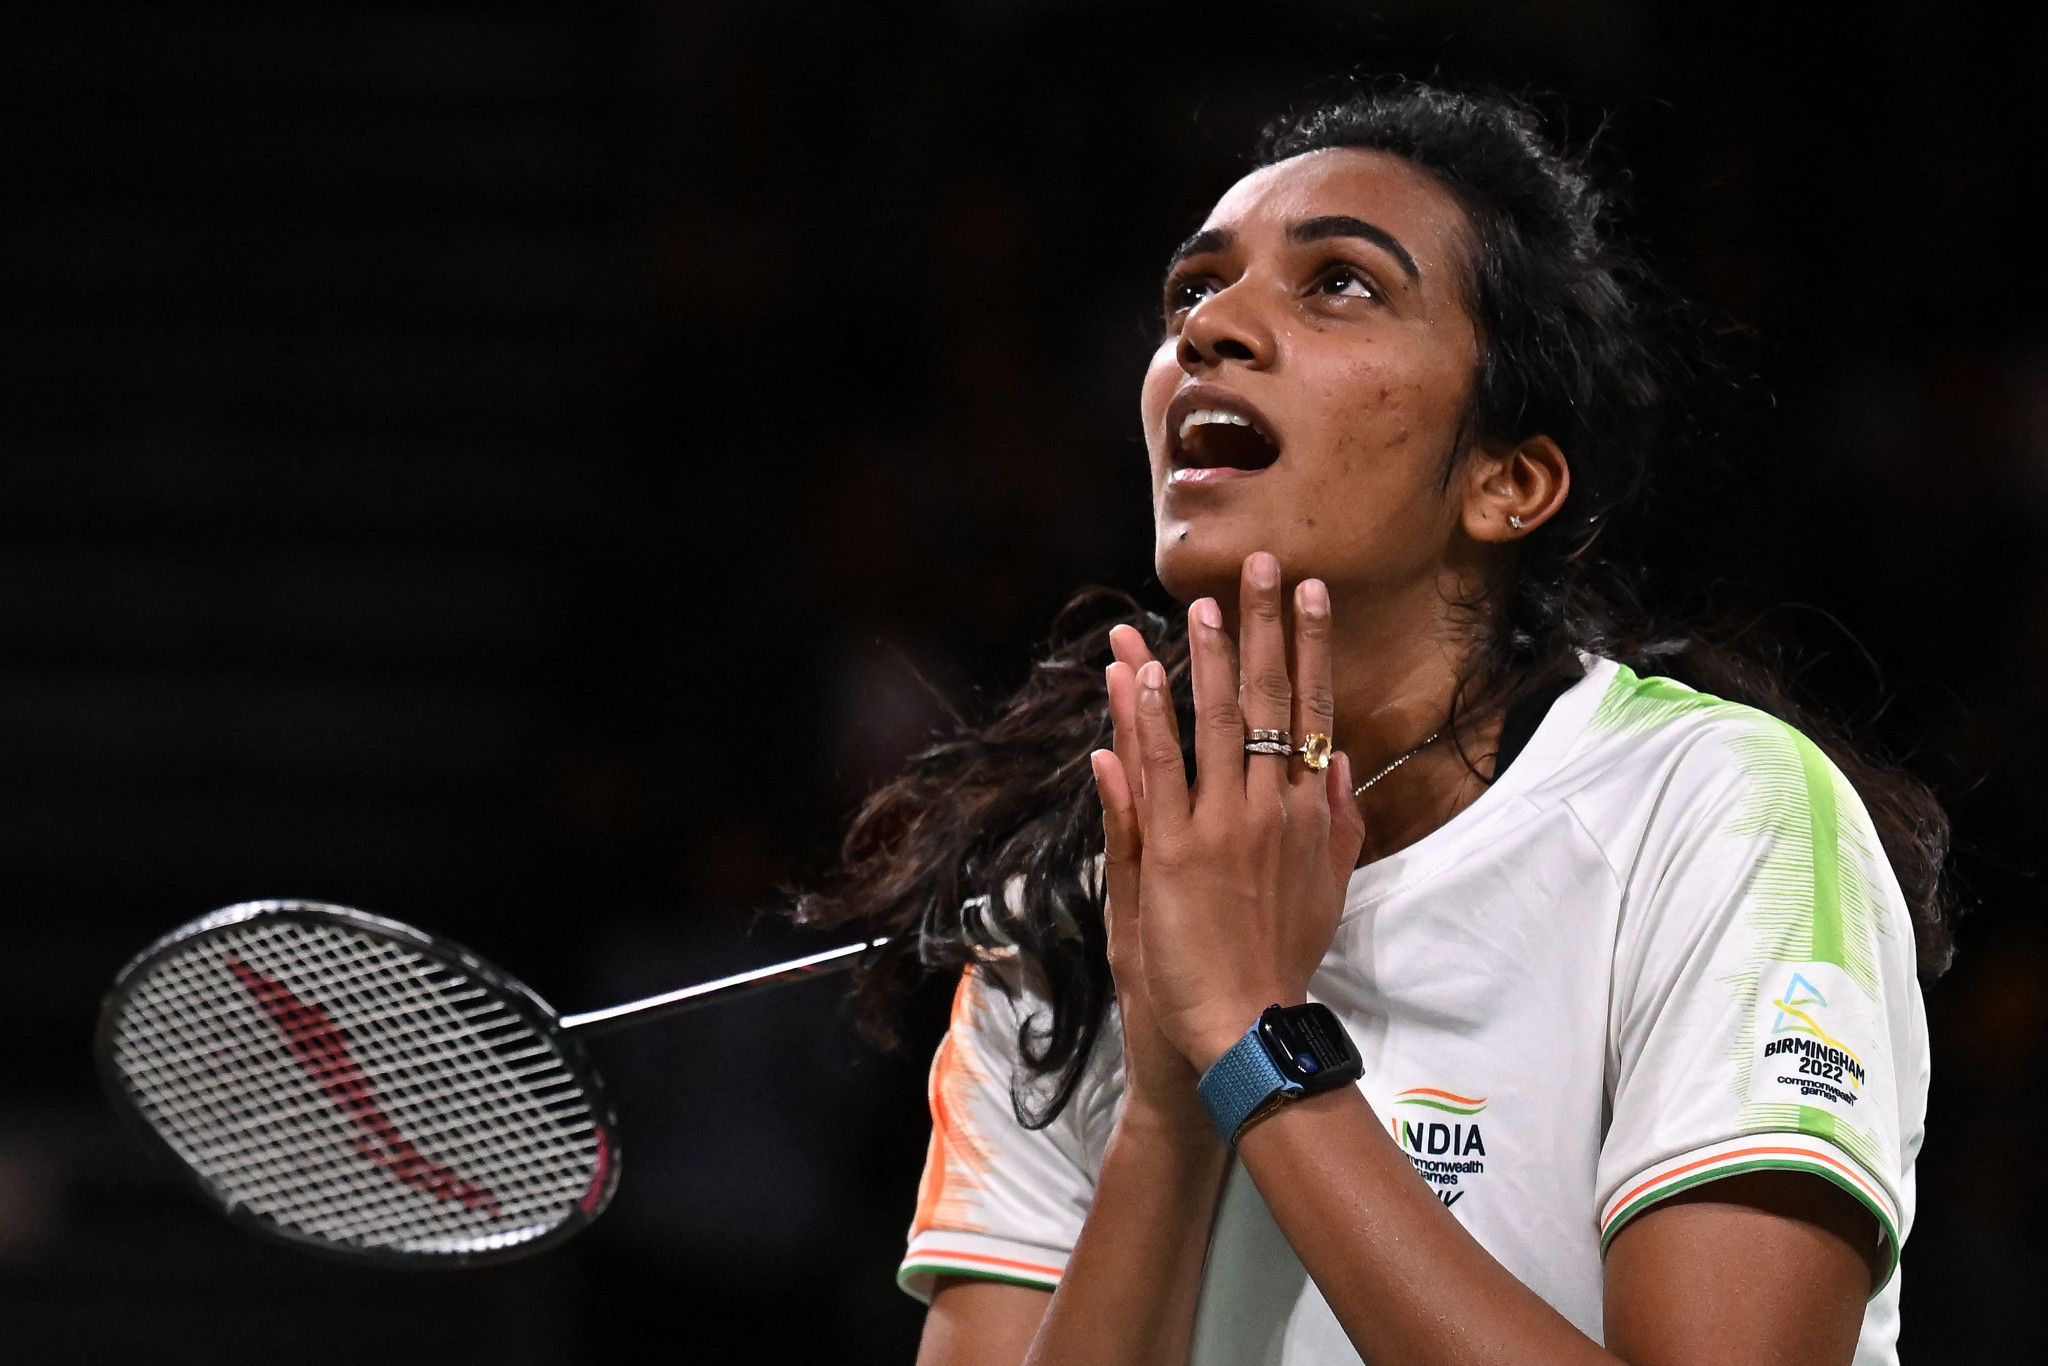 PV Sindhu will be looking to better her individual silver medal from the last edition of the Asian Games in Indonesia in 2018 ©Getty Images